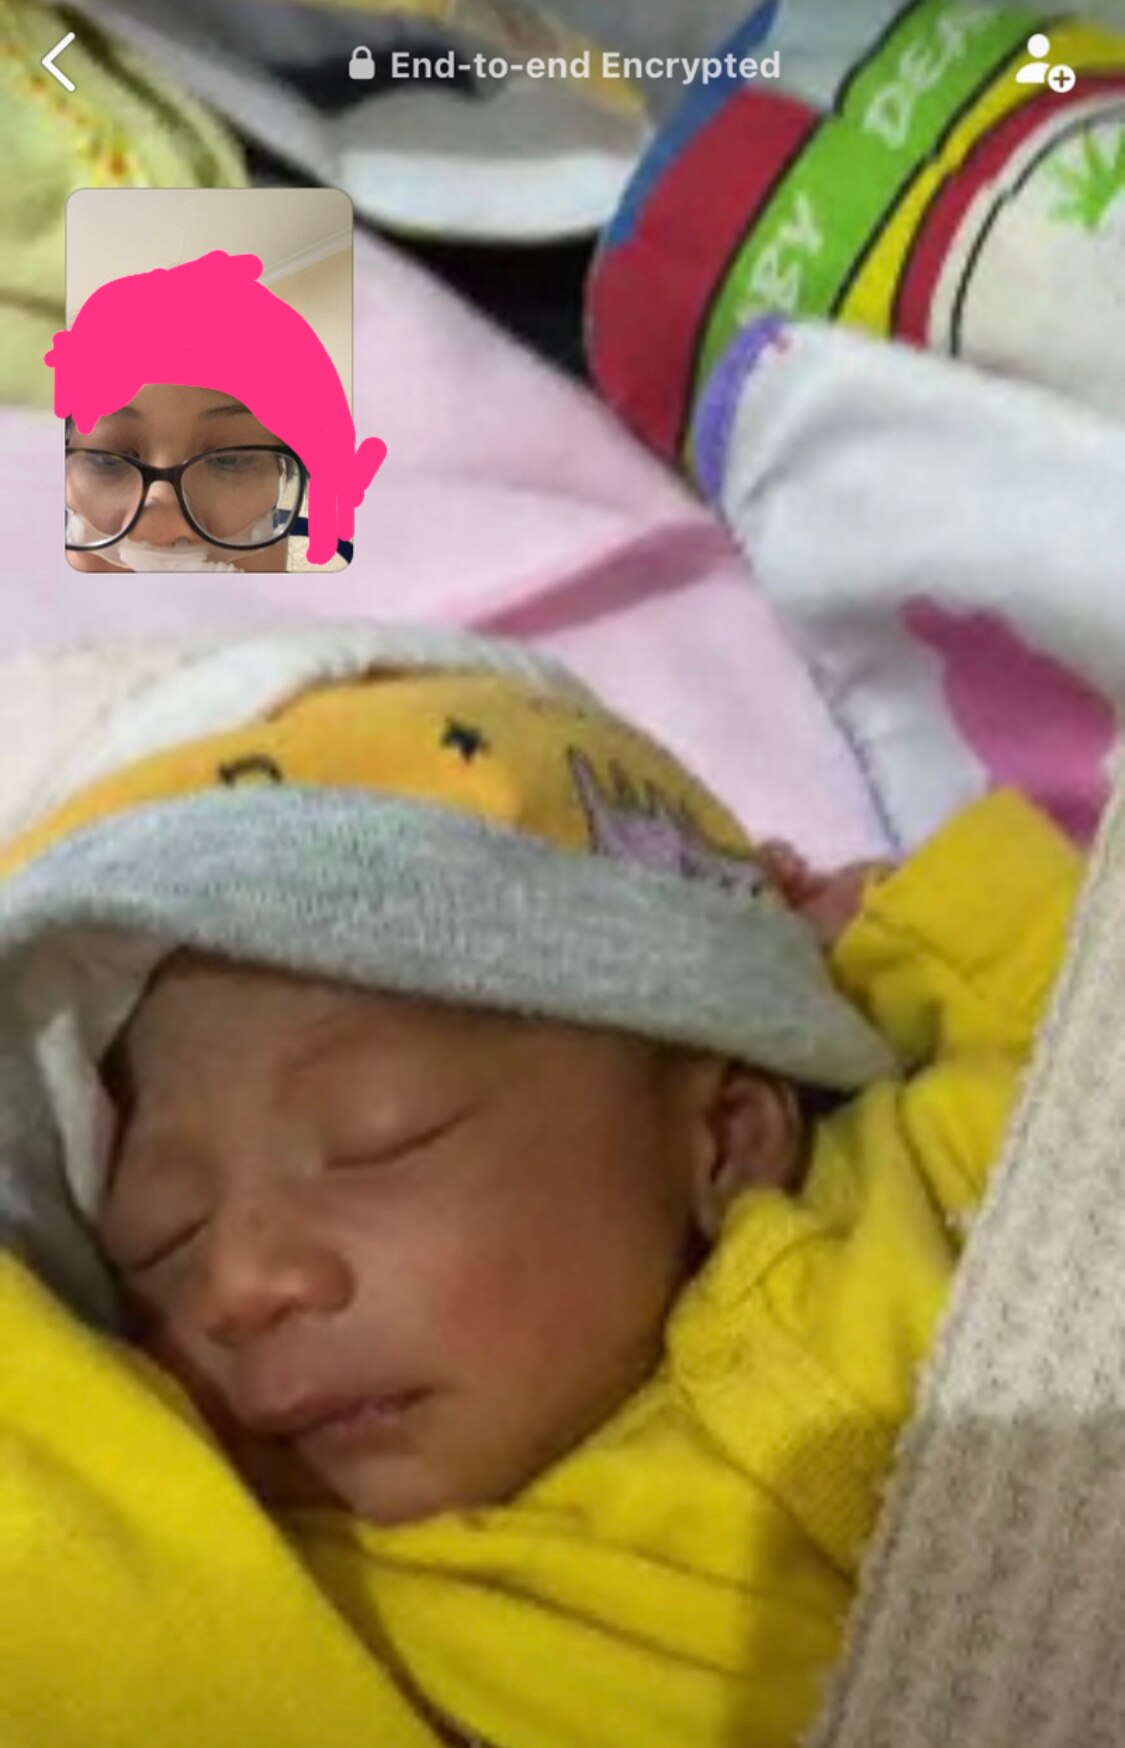 A woman appears on videocall with her newborn baby.